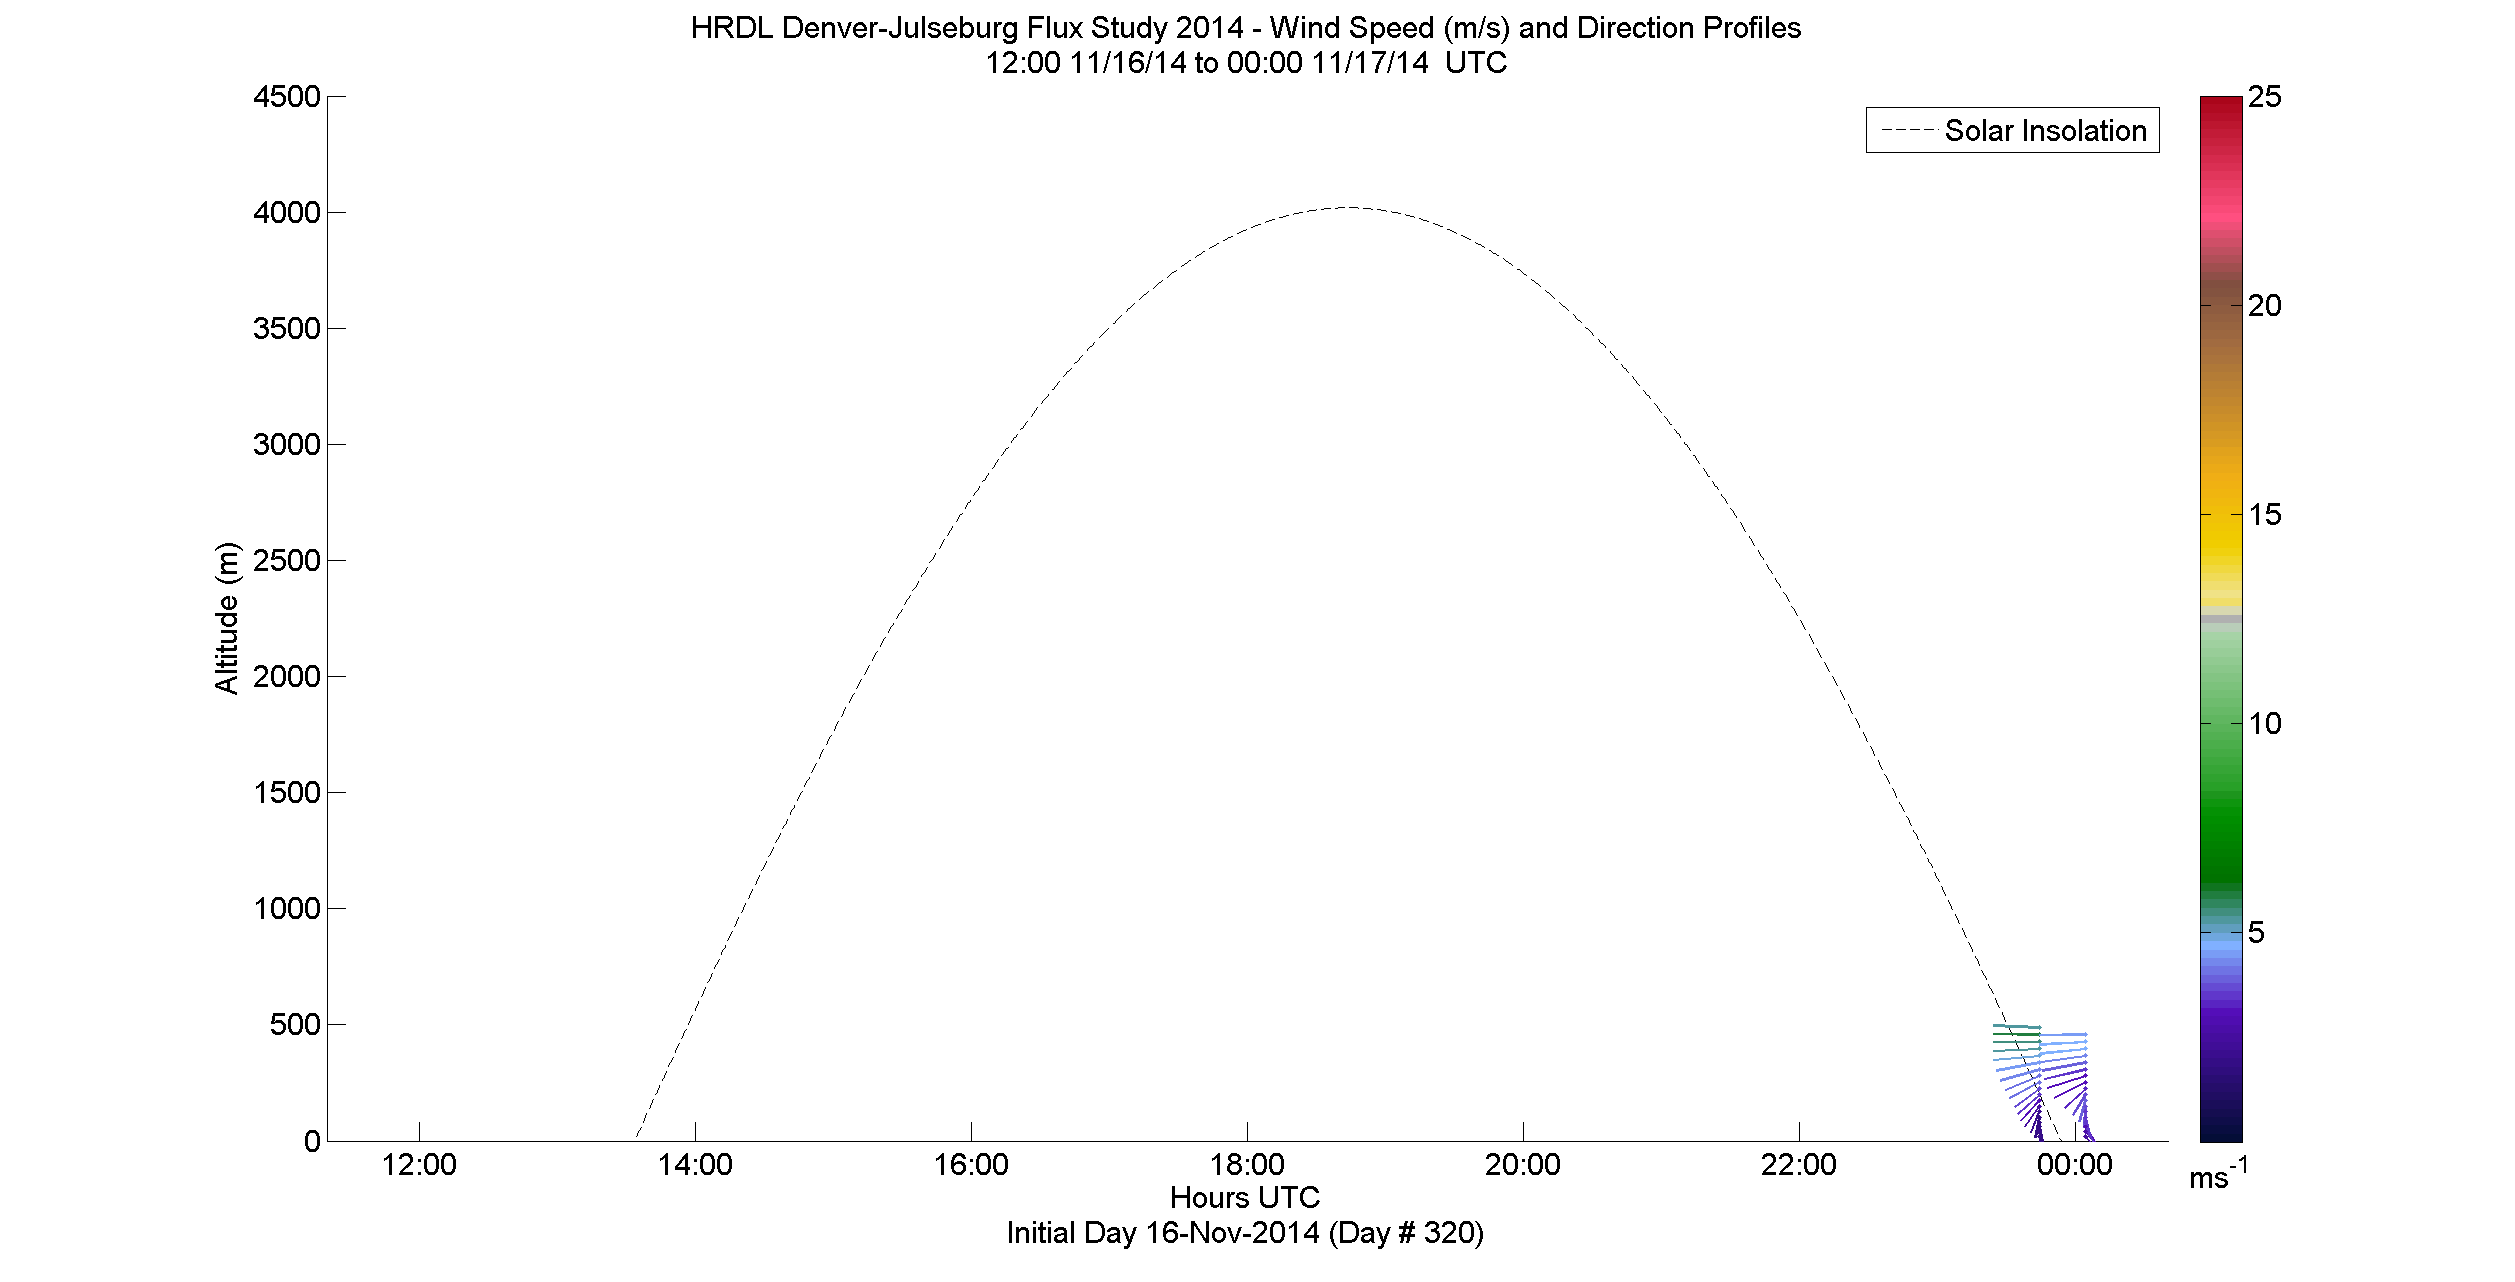 HRDL speed and direction profile - November 16 pm